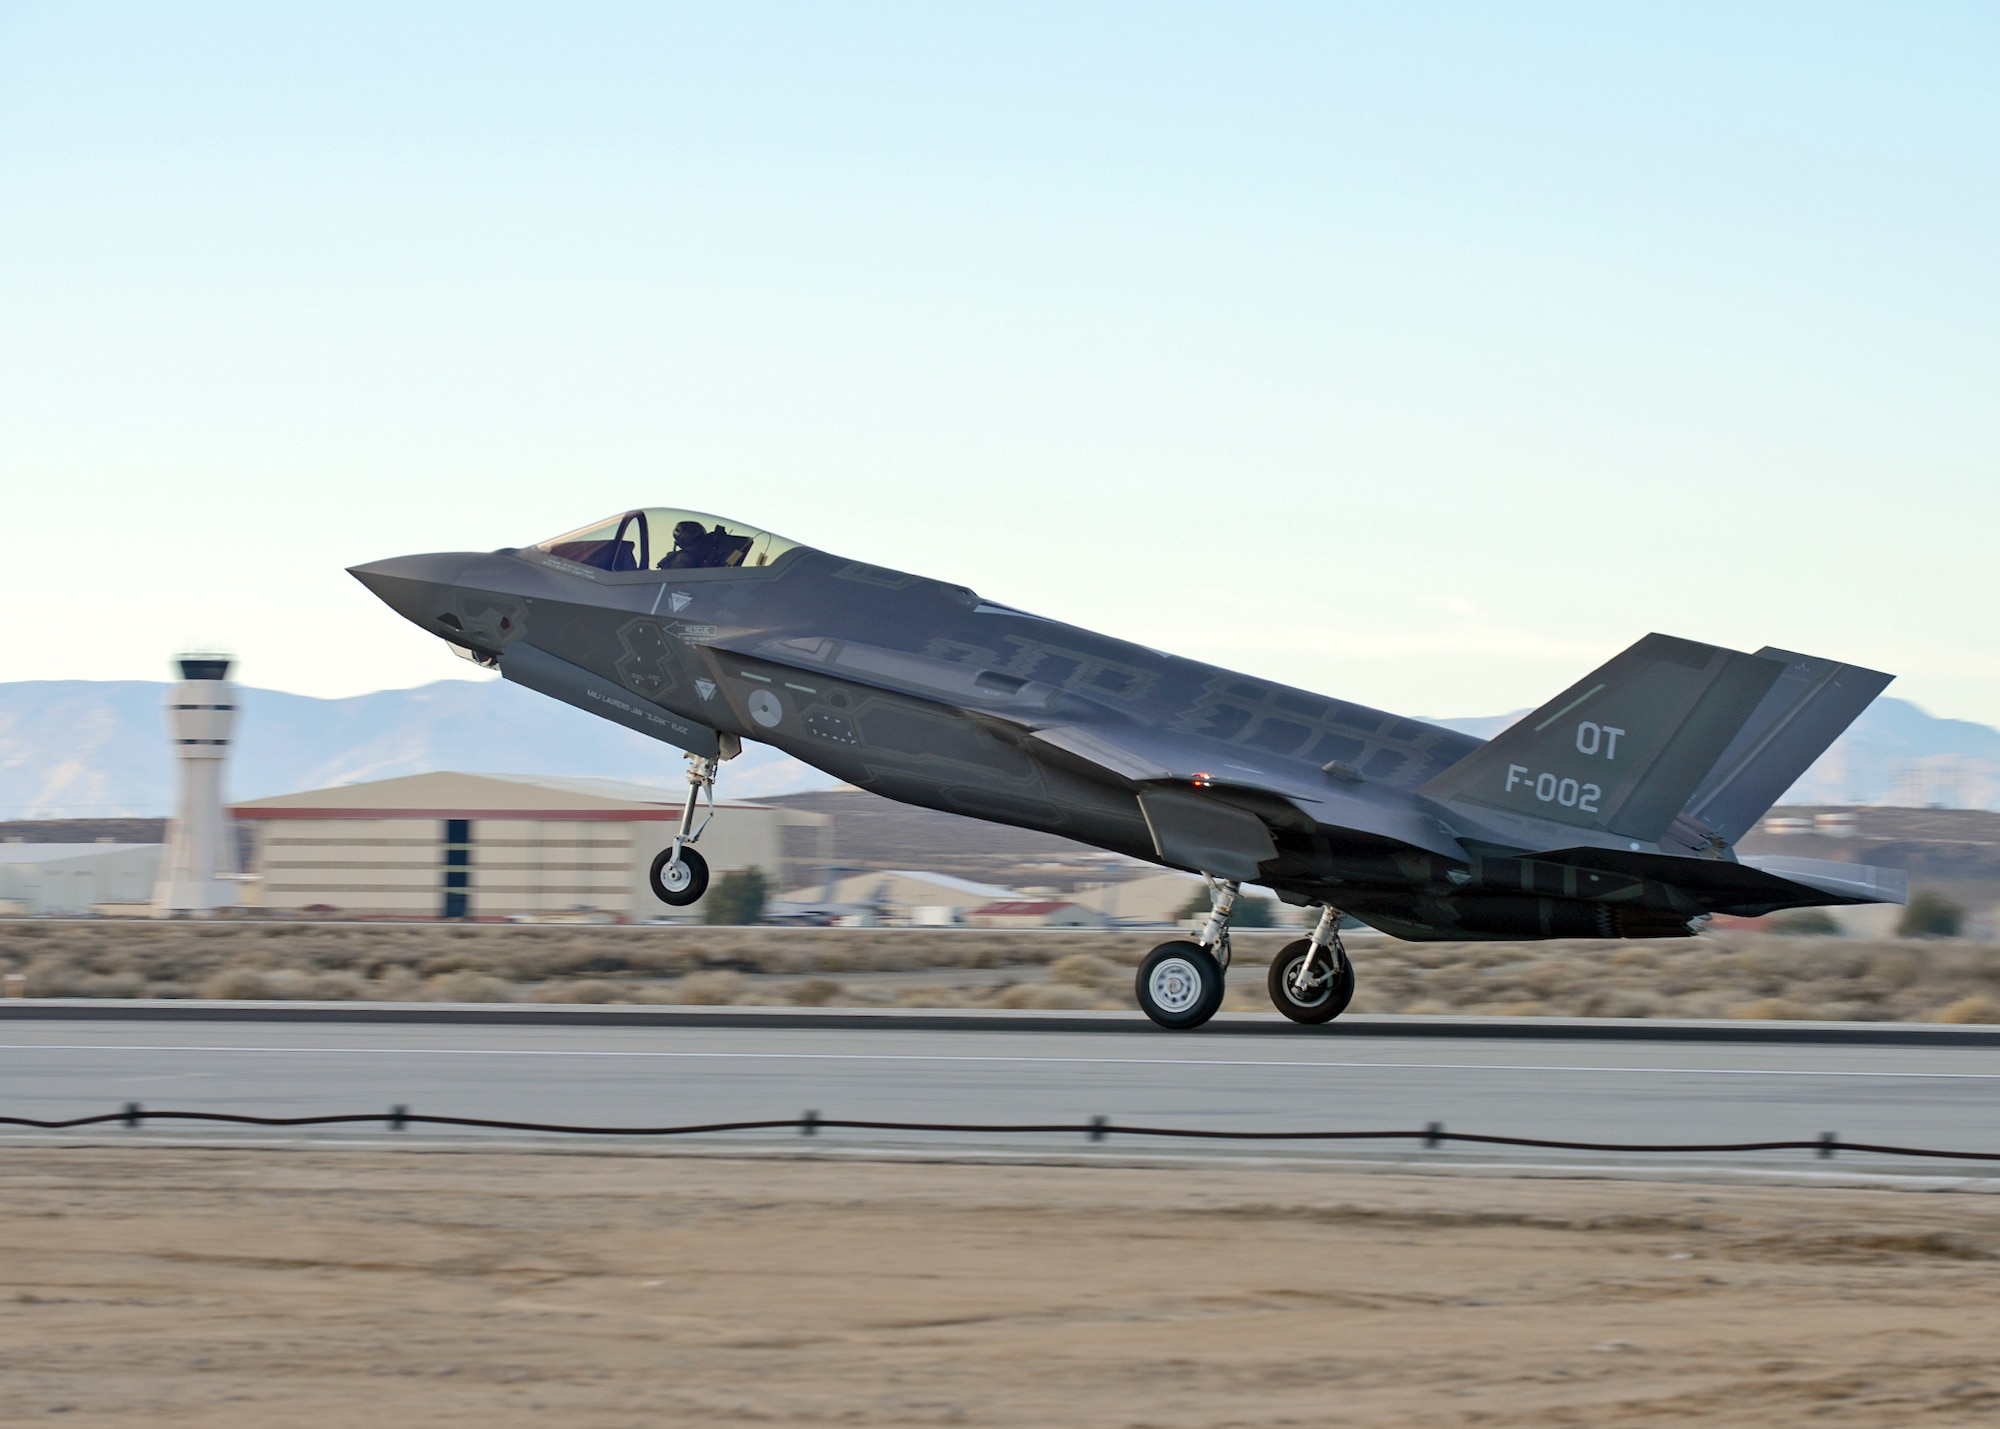 Two F-35 Lightning IIs, F-001 and F-002, of the Royal Netherlands Air Force landed at Edwards Jan. 16, after a five-hour flight from Eglin Air Force Base, Fla. The Joint Strike Fighters arrived for an operational test and evaluation phase here in the High Desert. (U.S. Air Force photo by Jet Fabara)